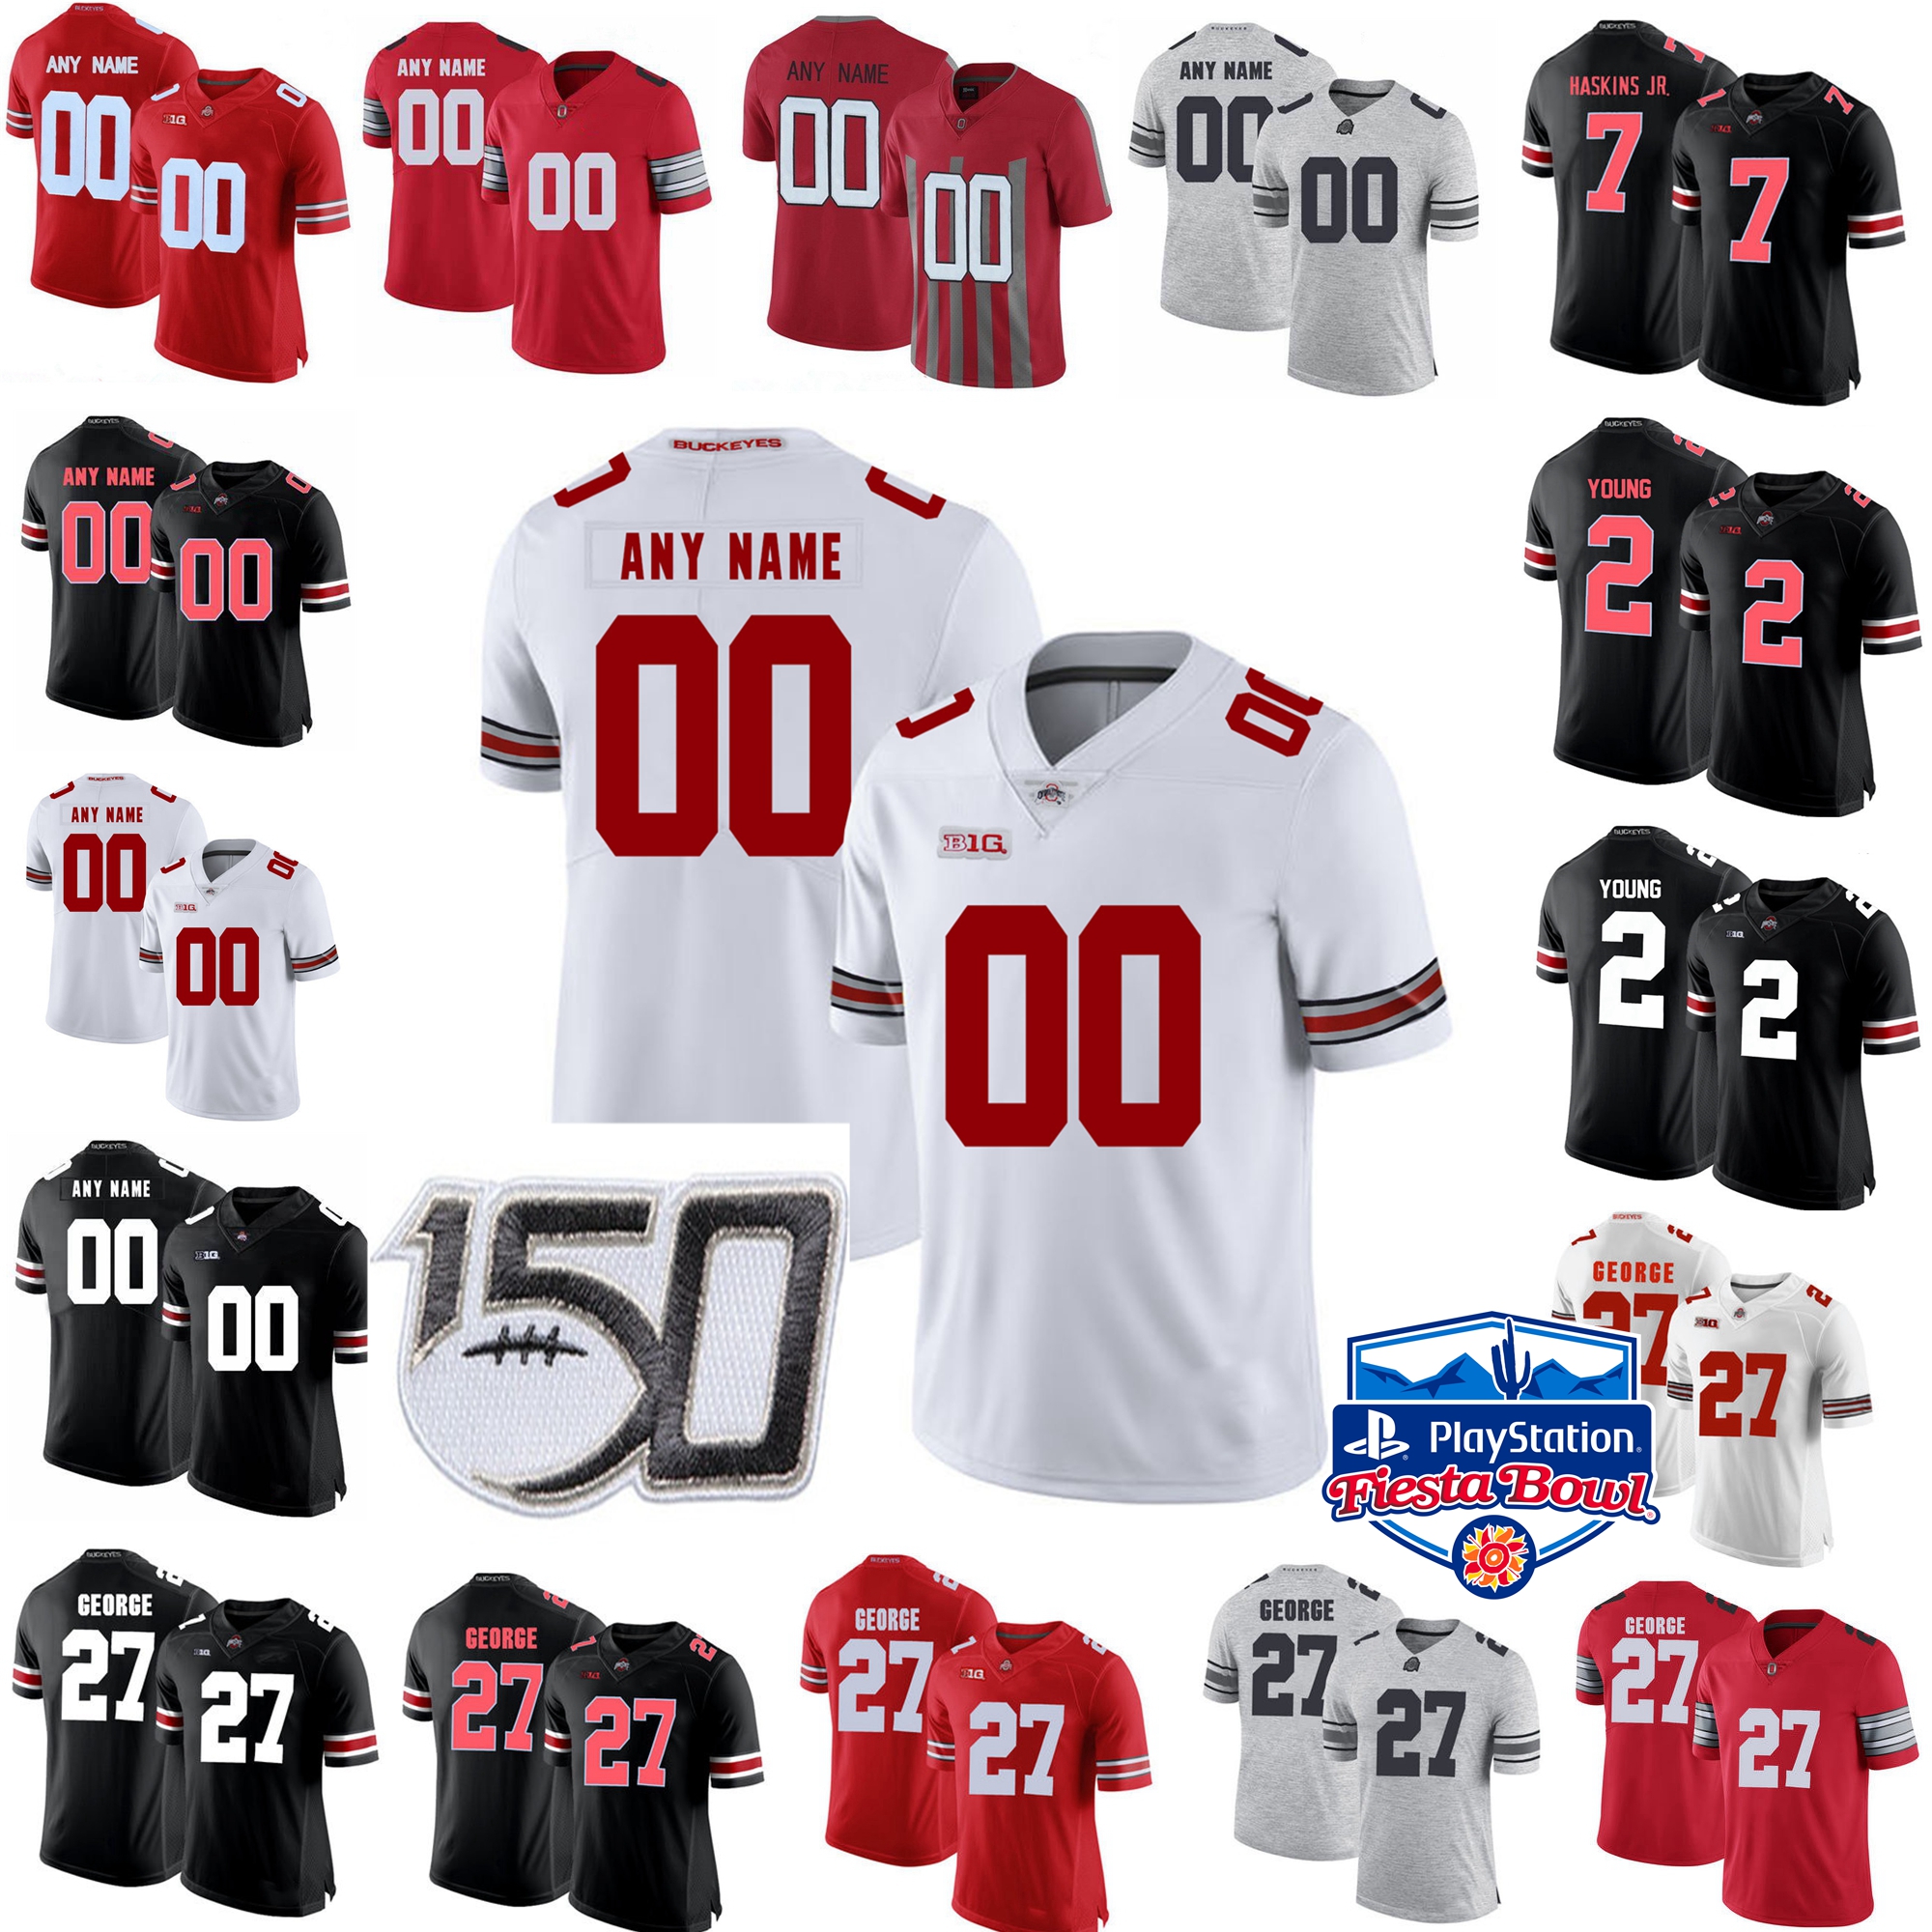 

Ohio State Buckeyes College Football Jerseys Kids Youth Chris Olave Jersey KJ Hill Jr. Ronnie Hickman Eddie George Fields Custom Stitched, Youth black red